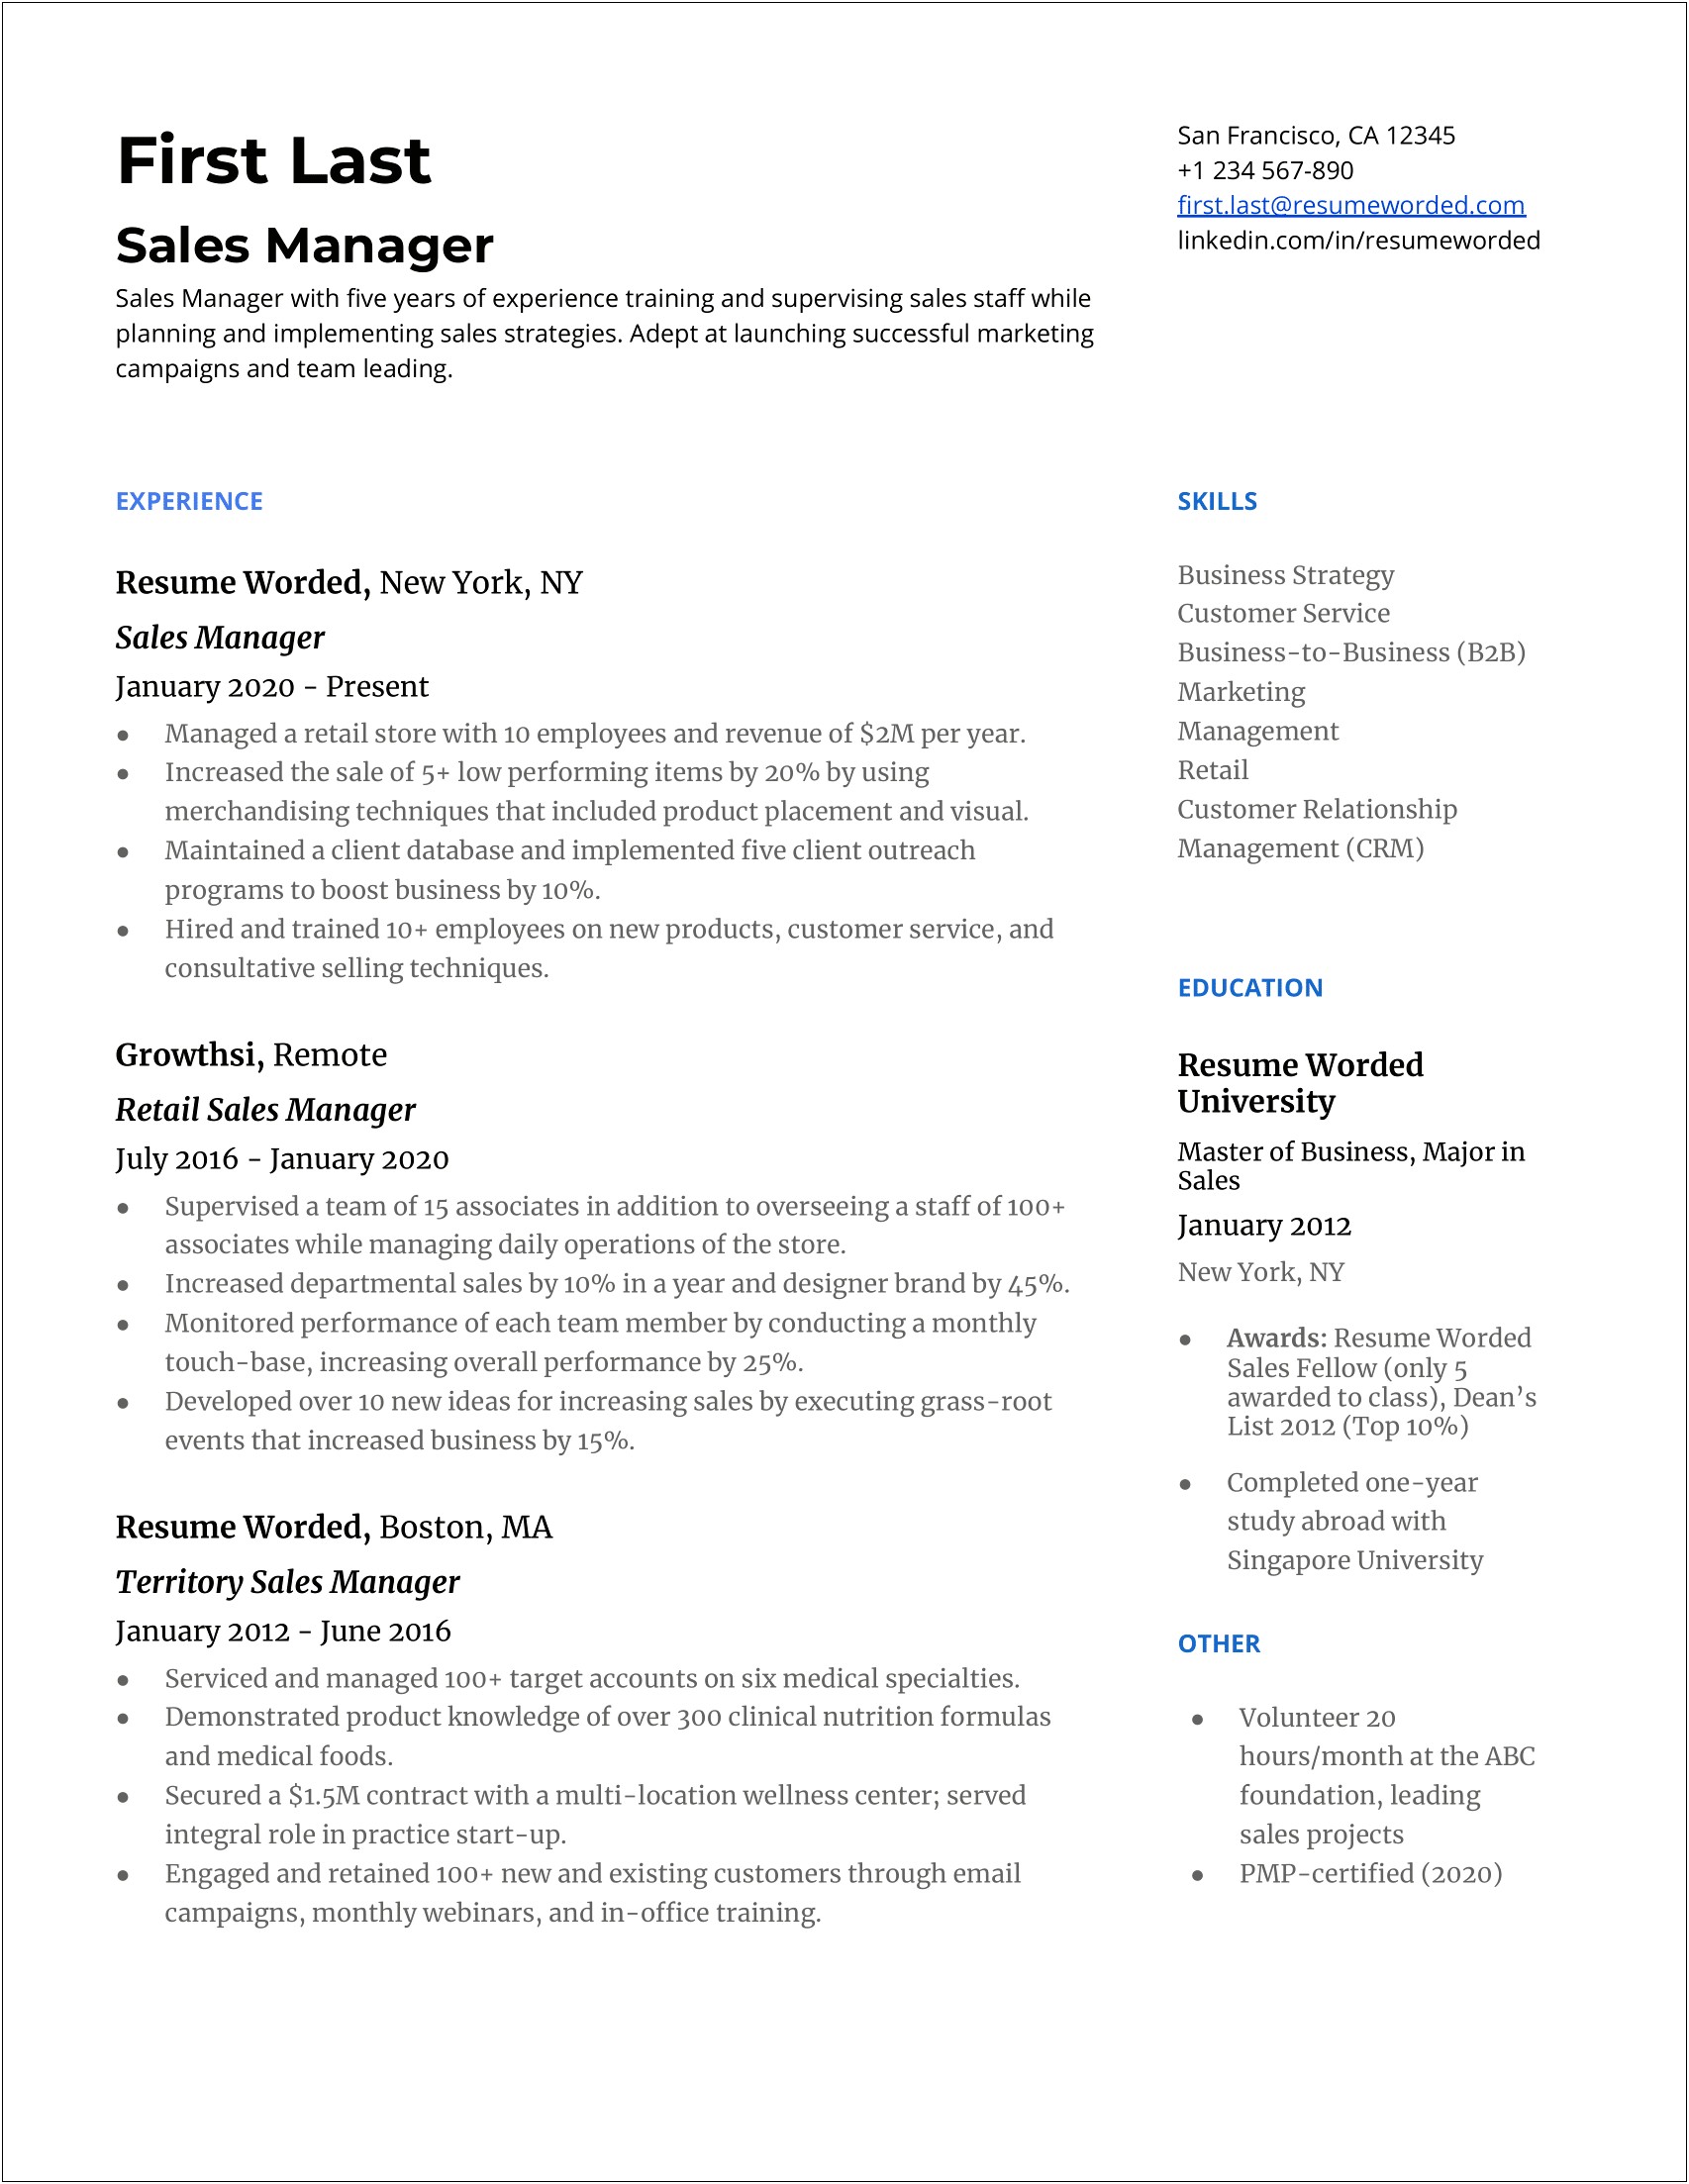 Resume Samples For Hotel Sales Managers